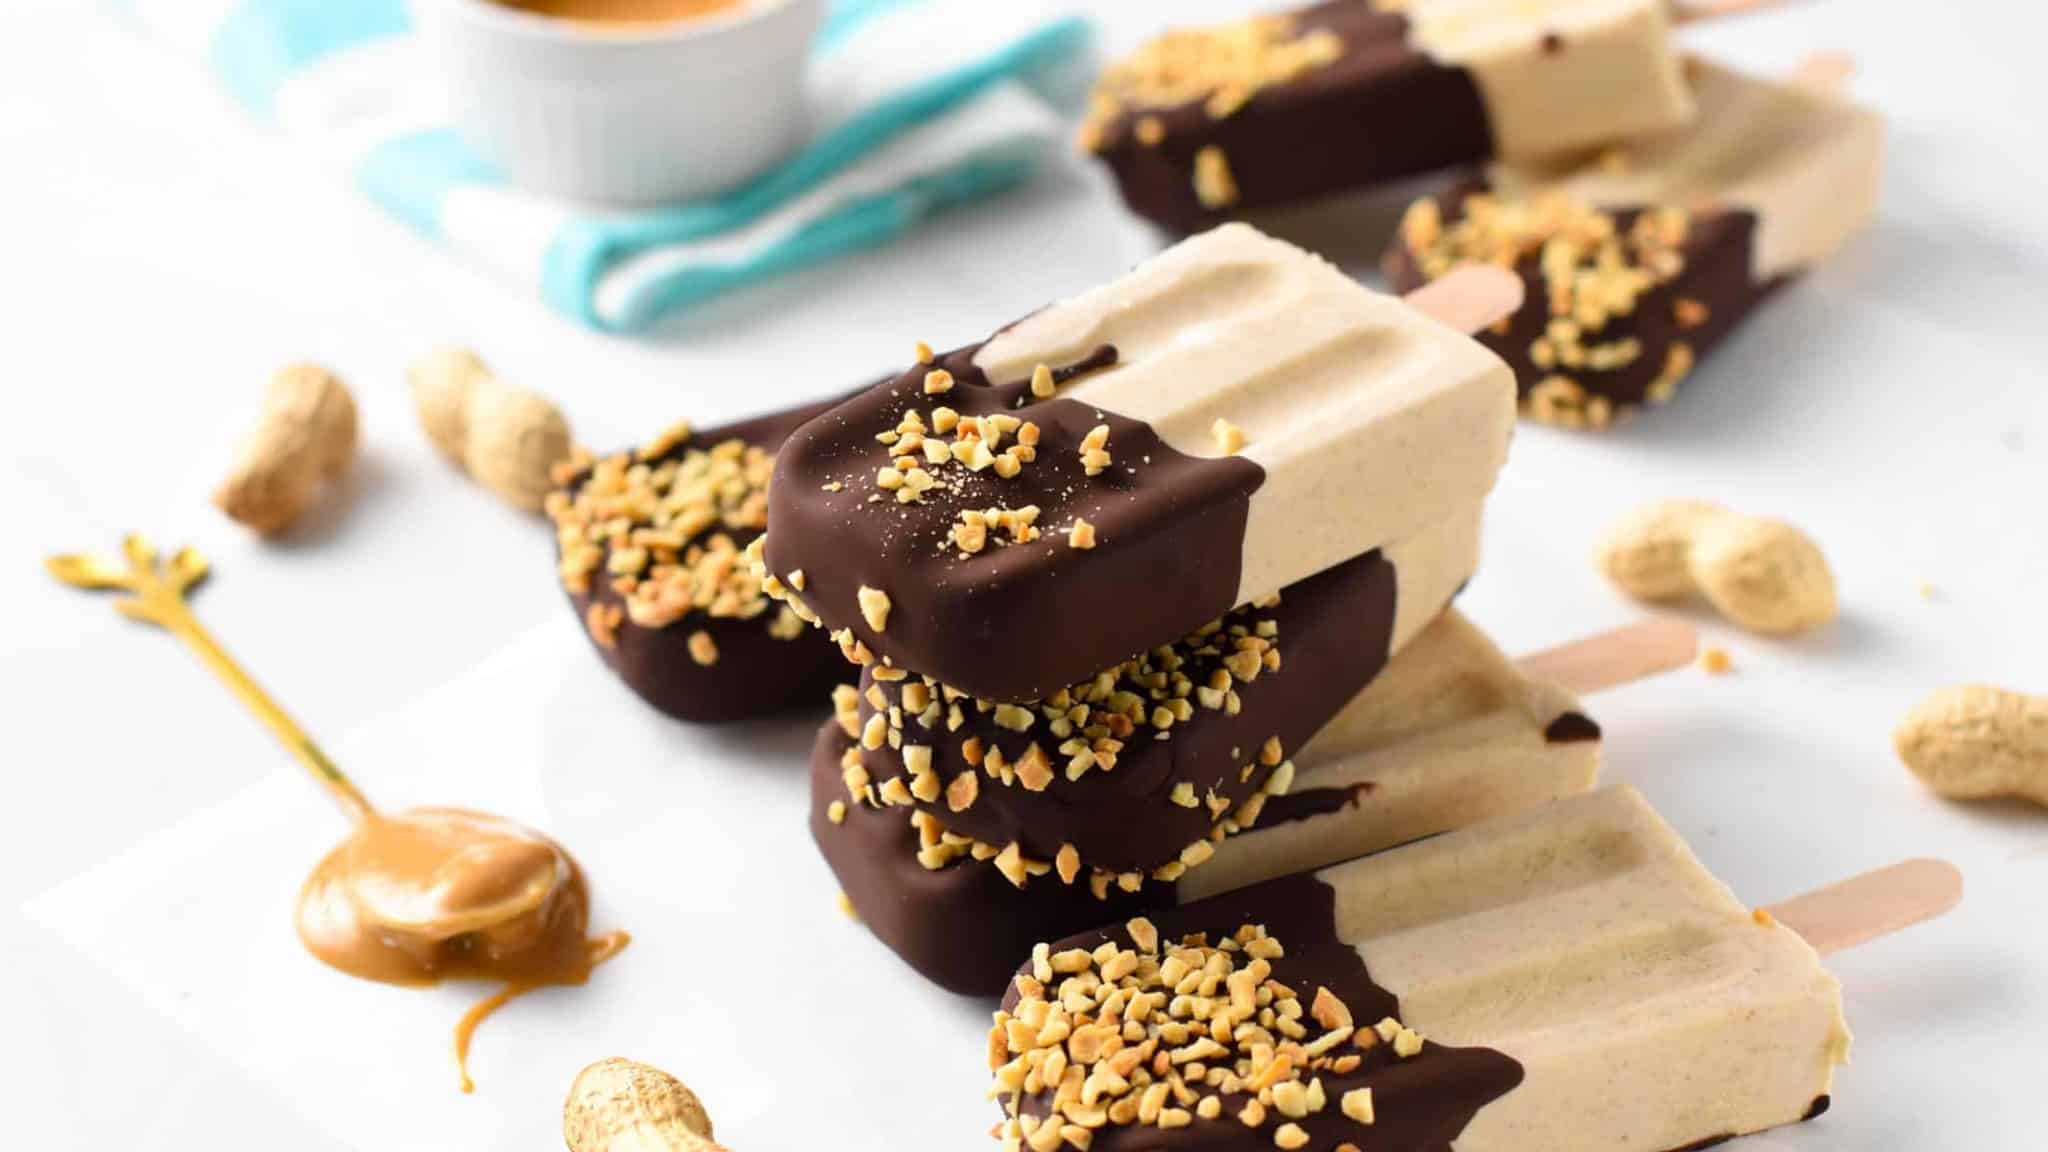 Healthy Peanut Butter Popsicles